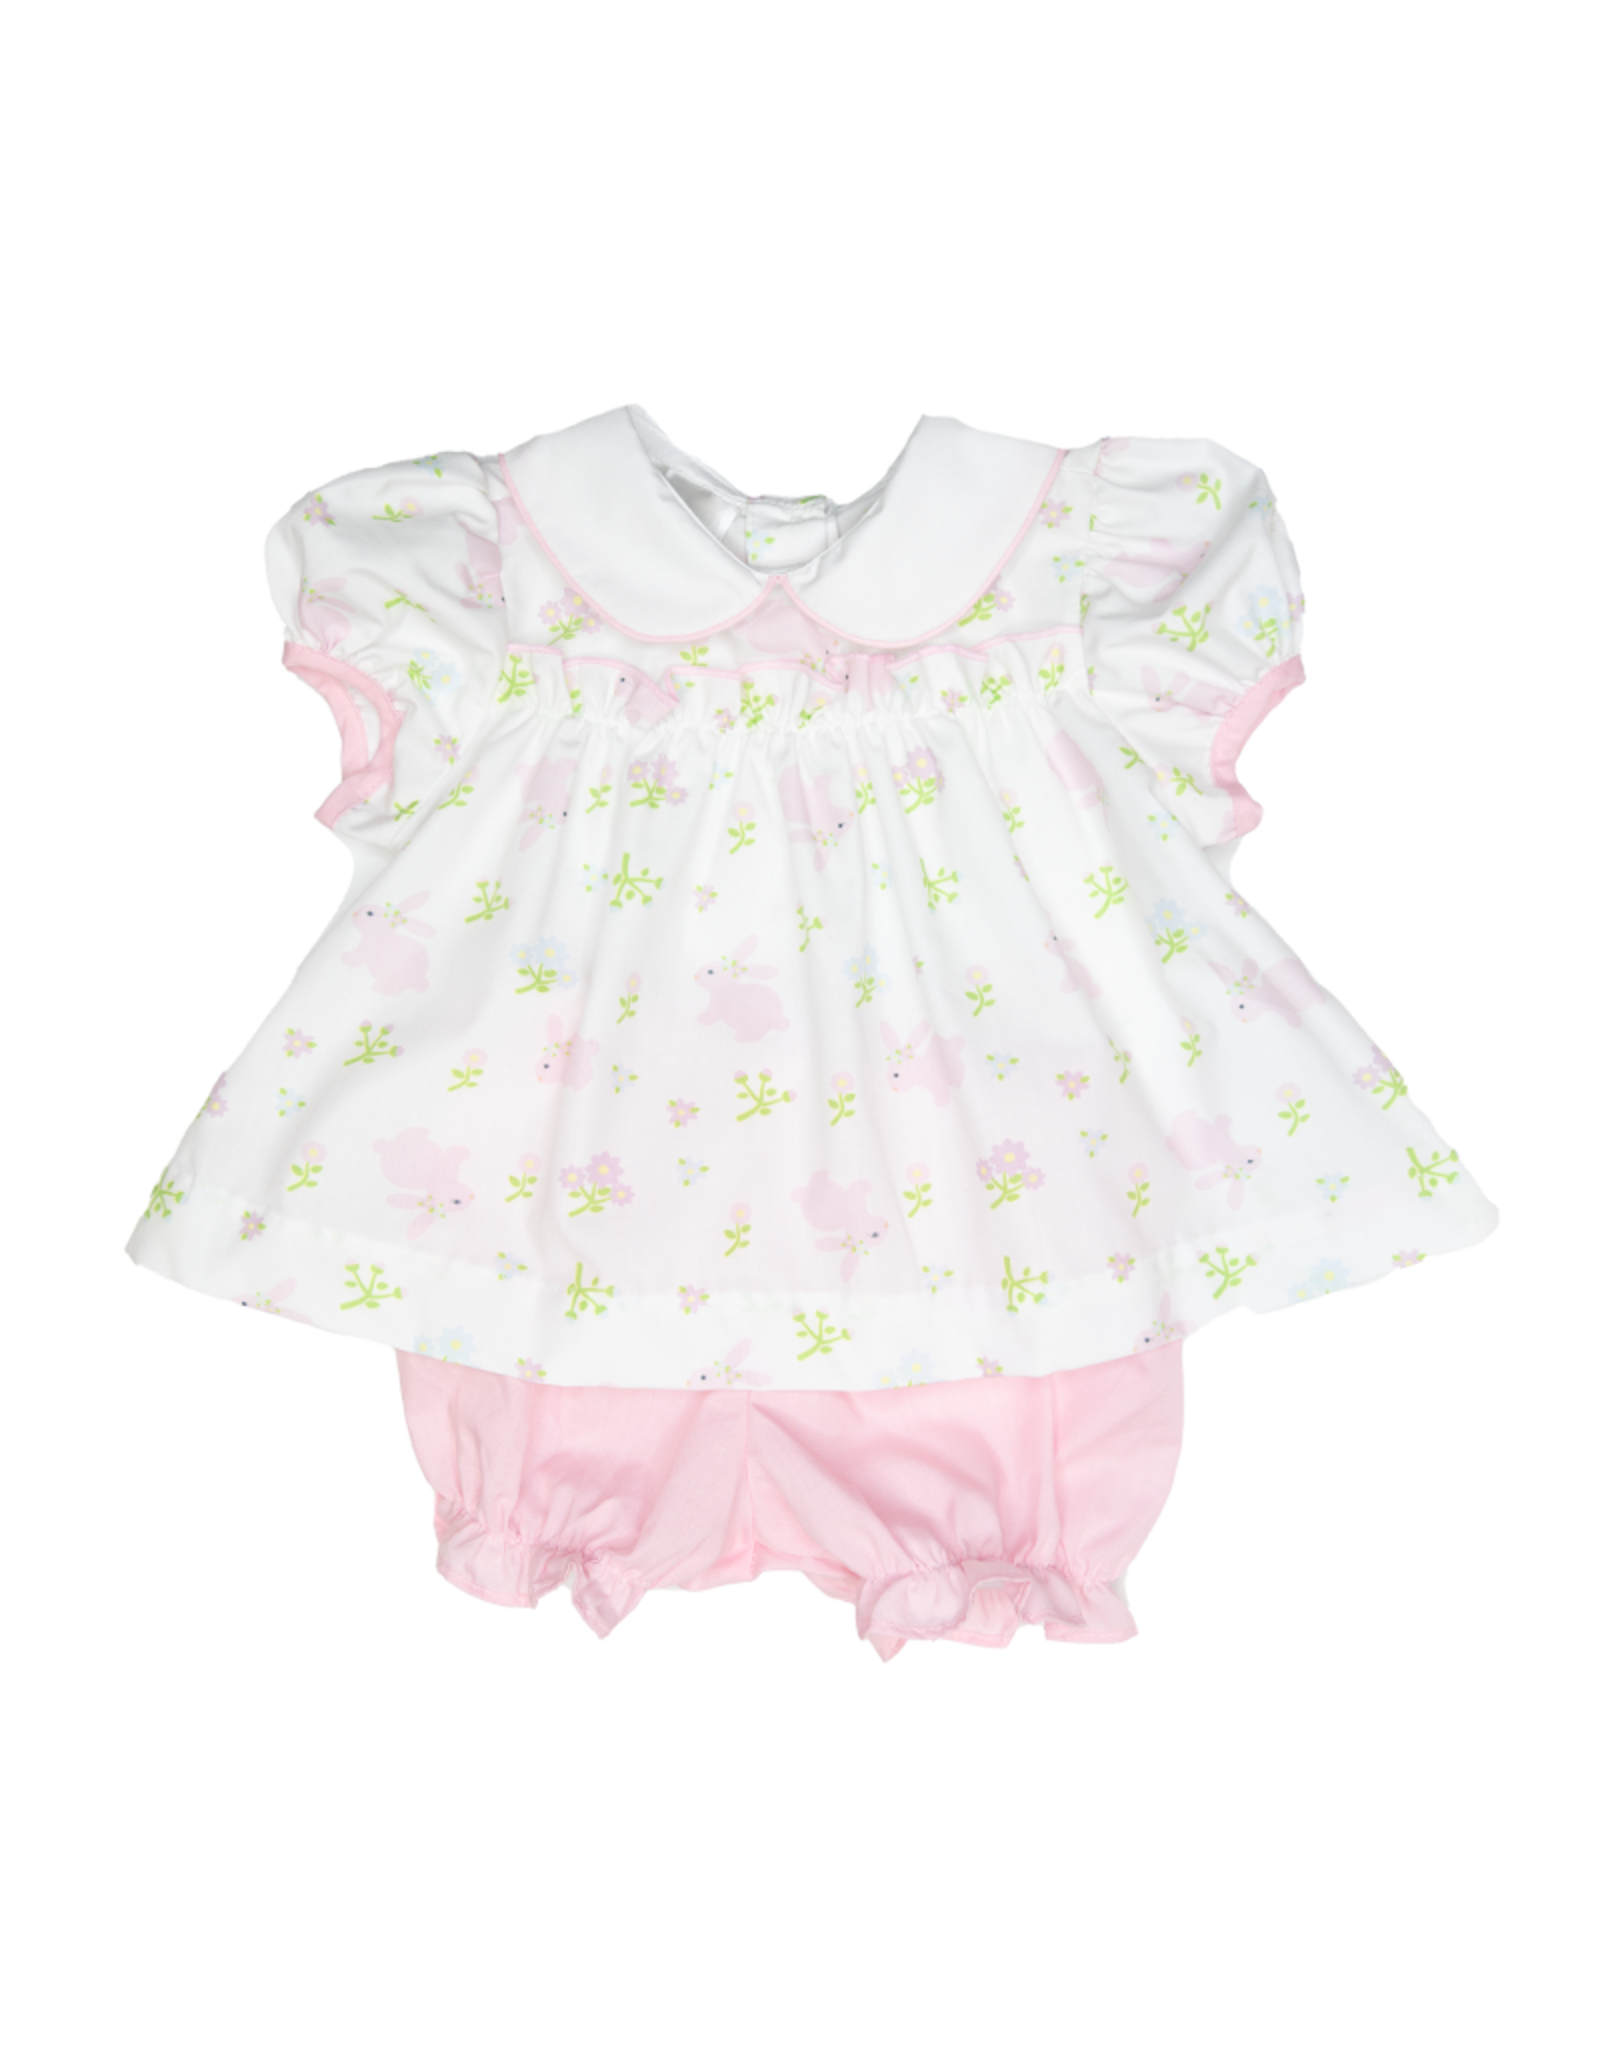 Baby Blessings BB0676 Serenity Pink Bunnies Bloomer Set